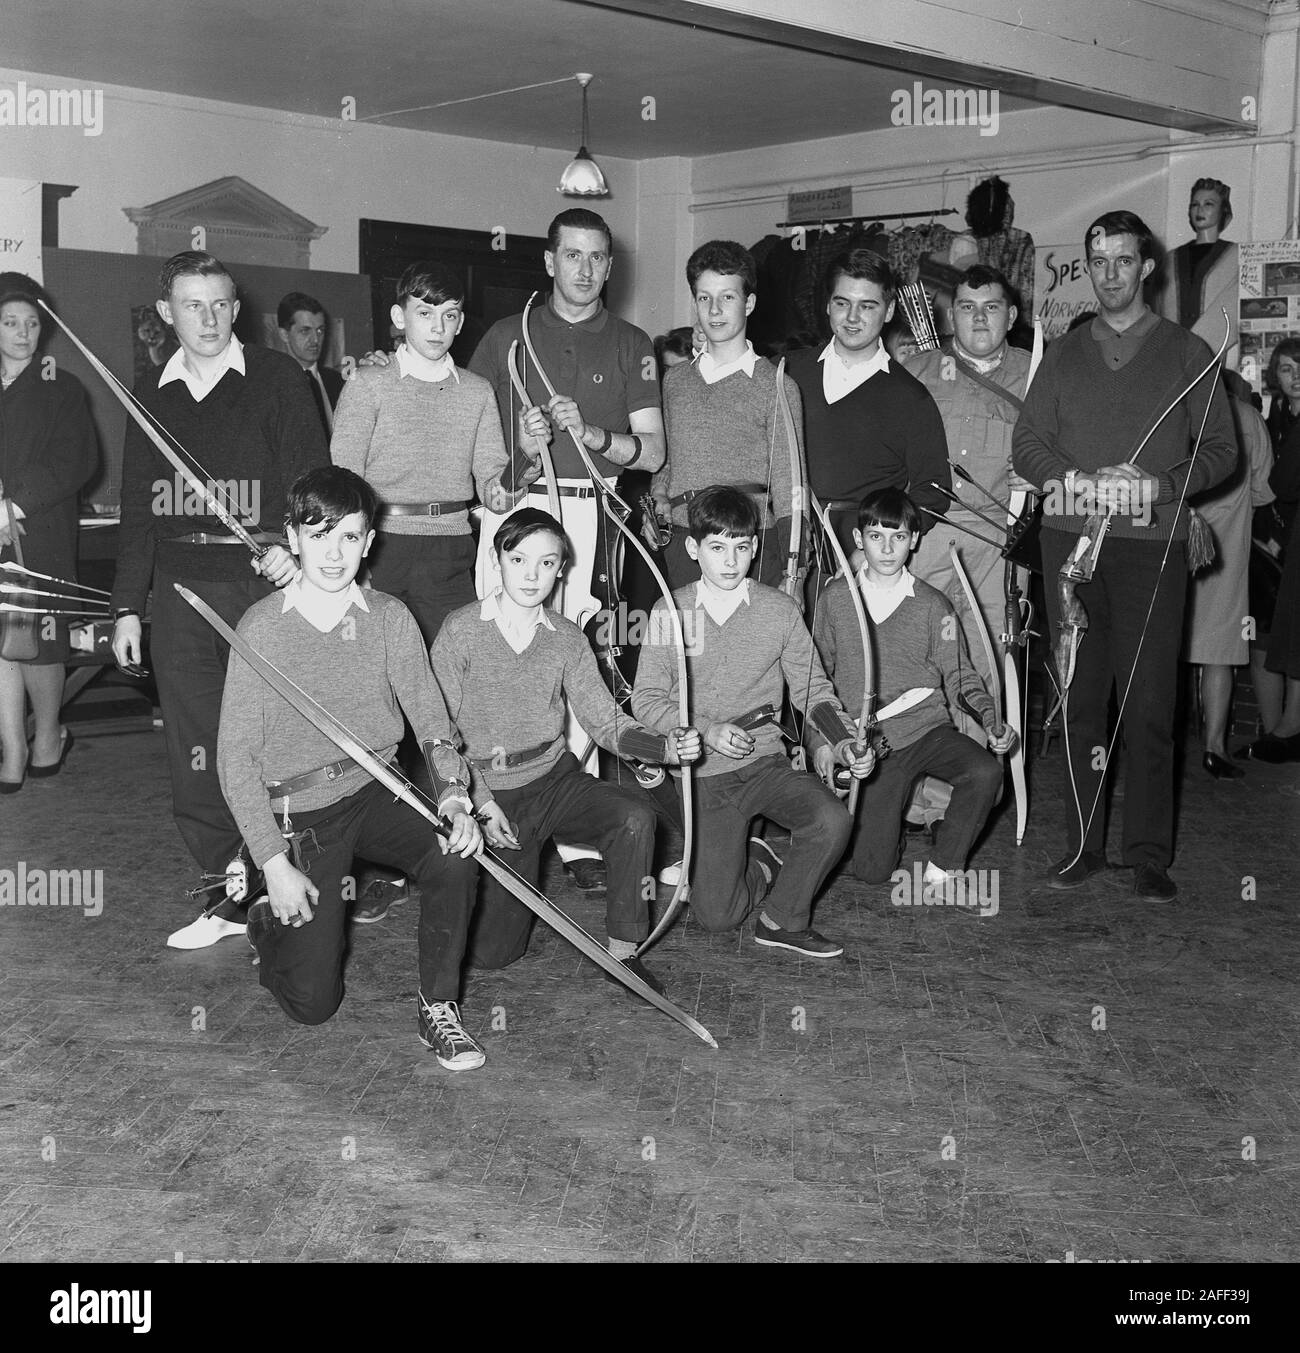 1960s historical, inside a room, young members of an archery club gathered with their bows for a group photo, England, UK. Stock Photo